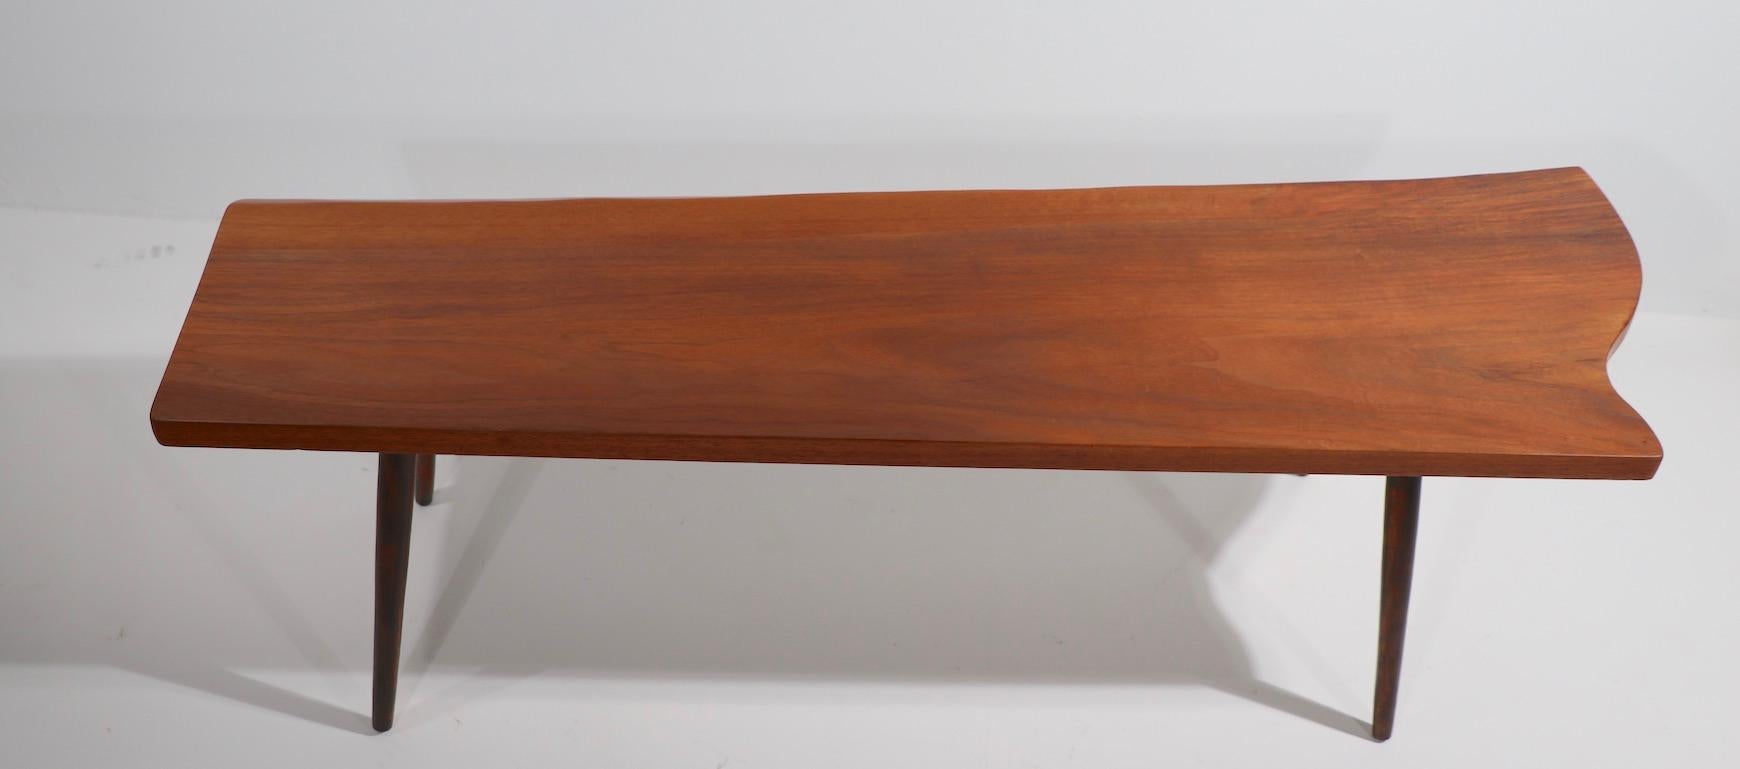 Wood Mid Century Free Edge Coffee Table by Roy Sheldon Dated 1957 For Sale